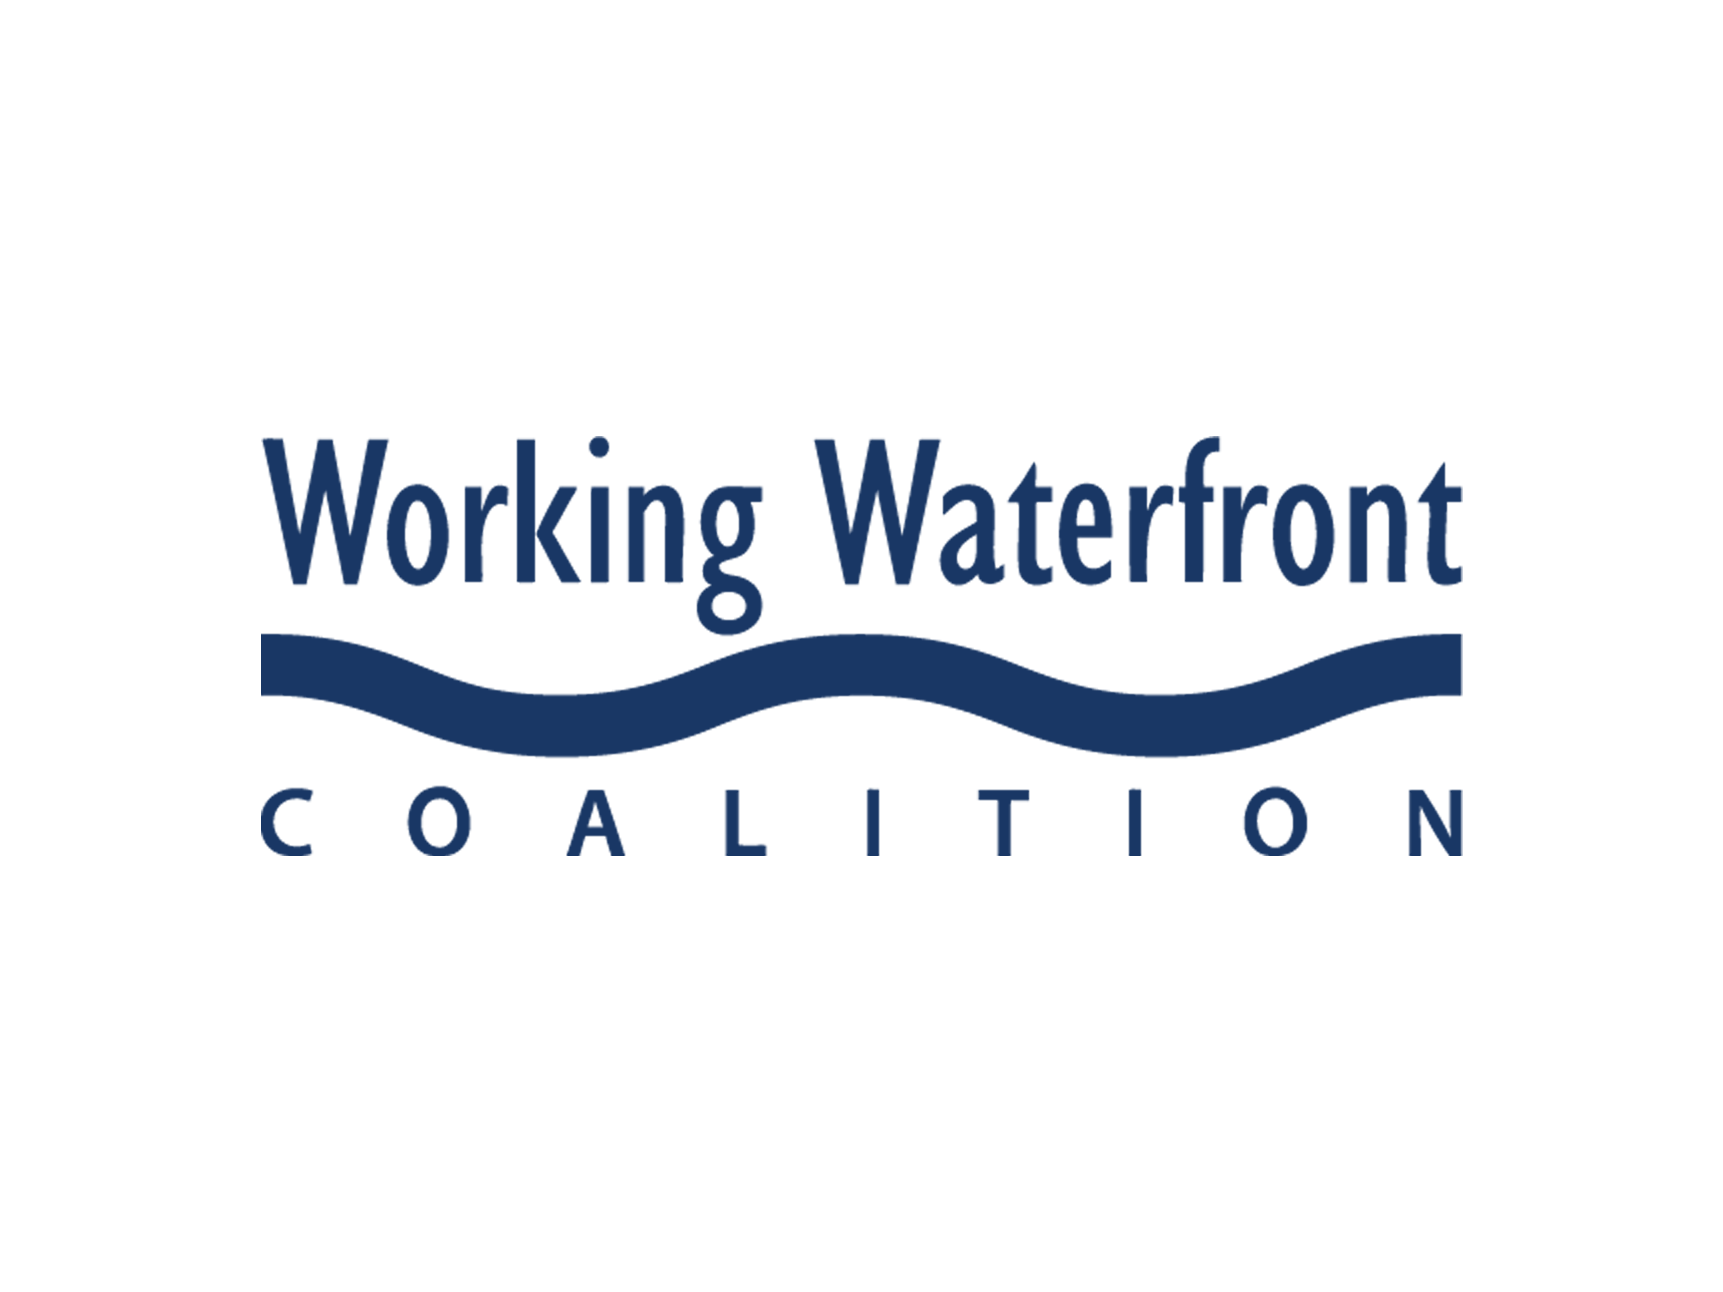 Working-Waterfront-Coalition-Wings-Impact-Partner-Logo.png